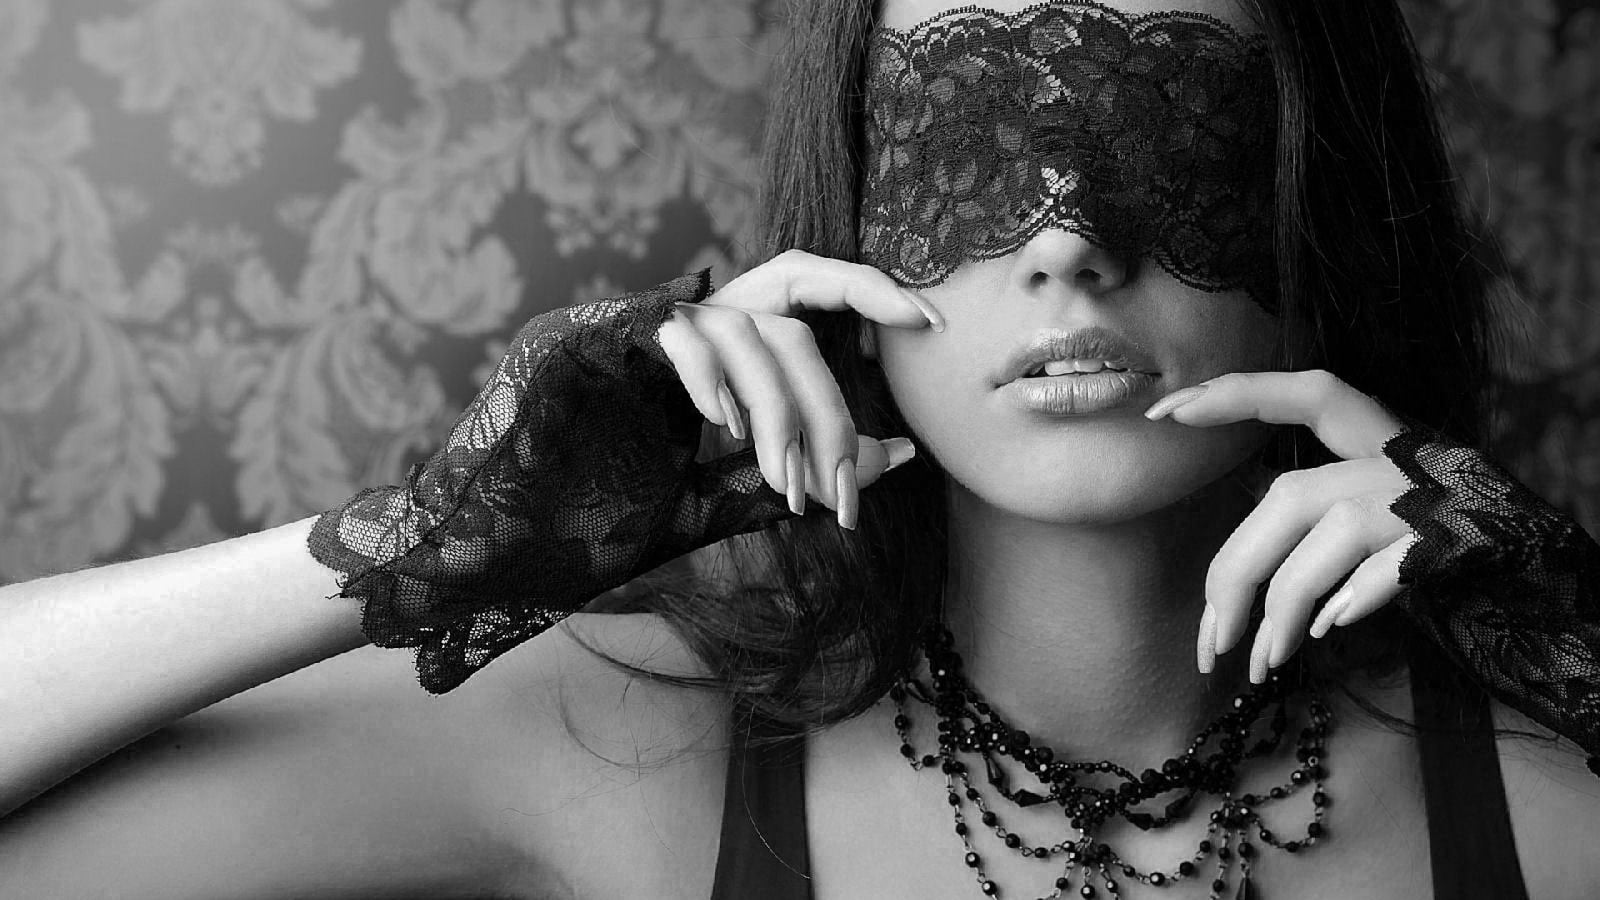 blindfold, monochrome, women, lace, hand on face, one person